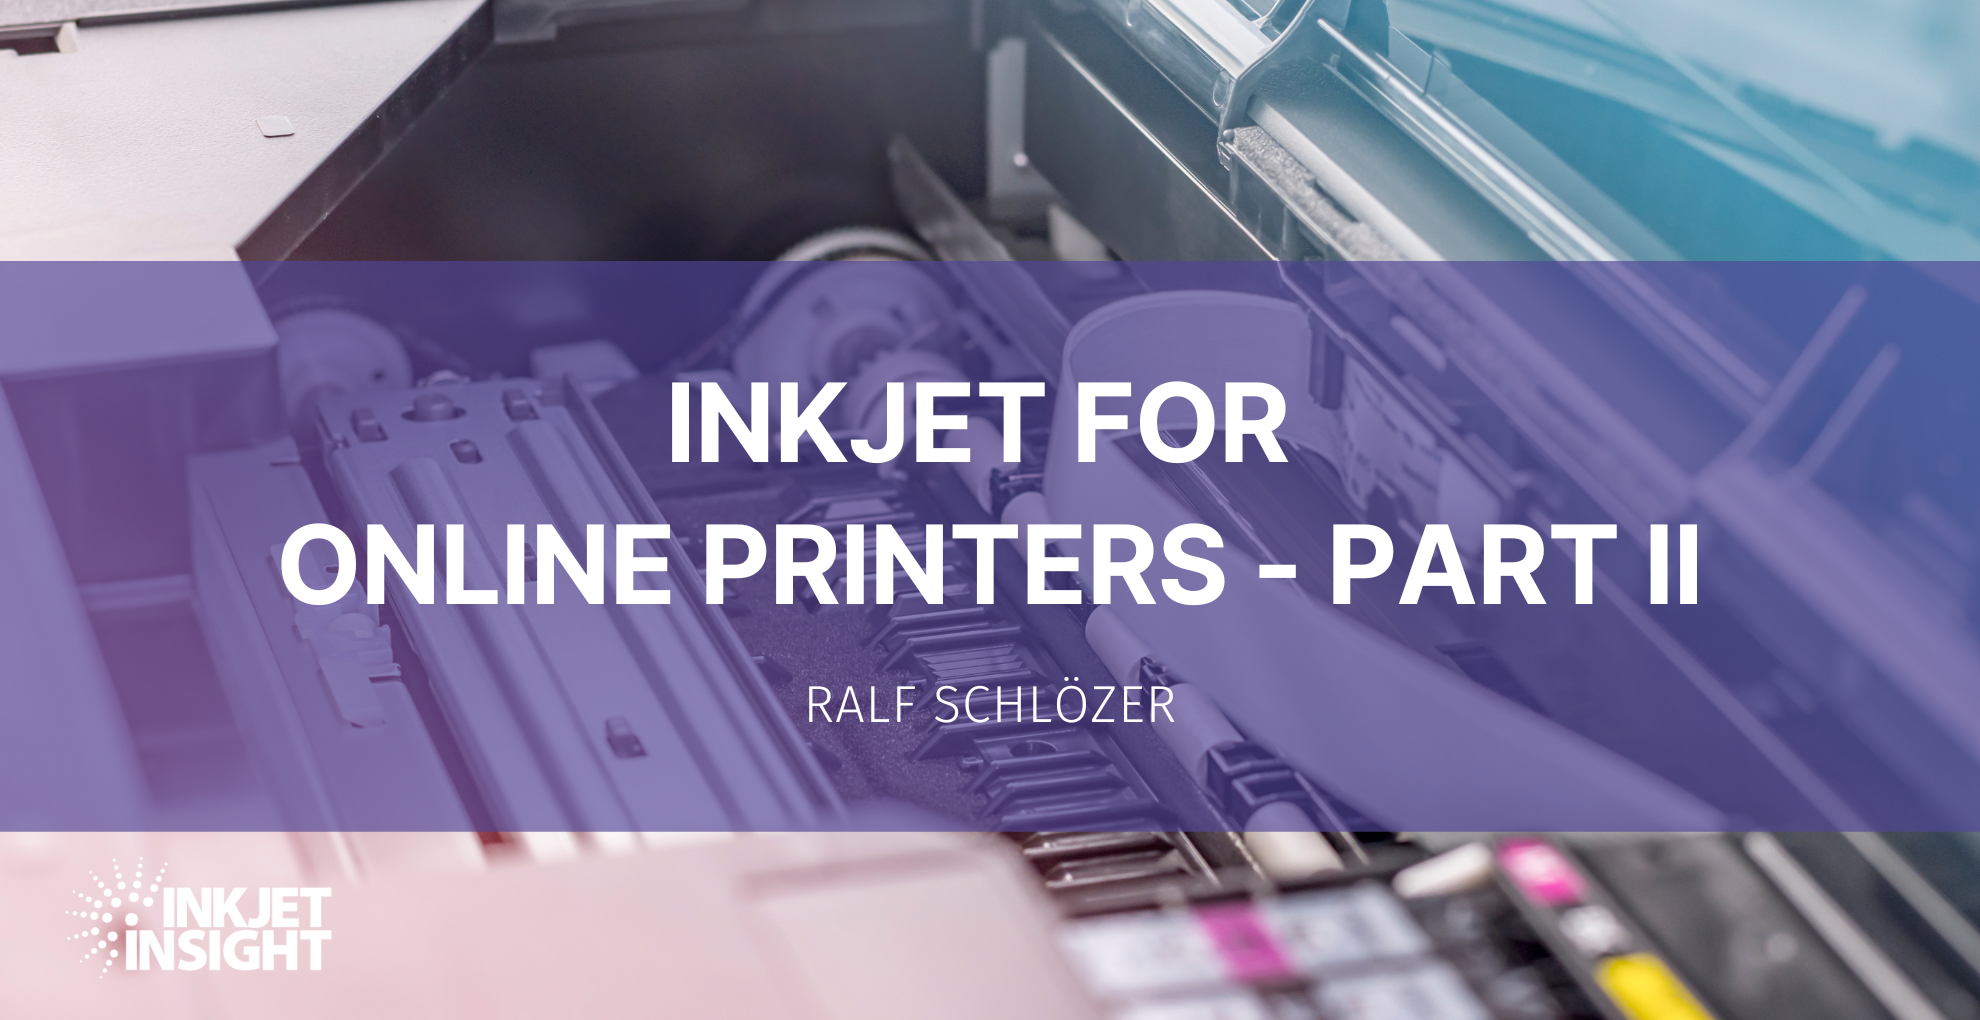 Featured image for “Inkjet for Online Printers – Part II”